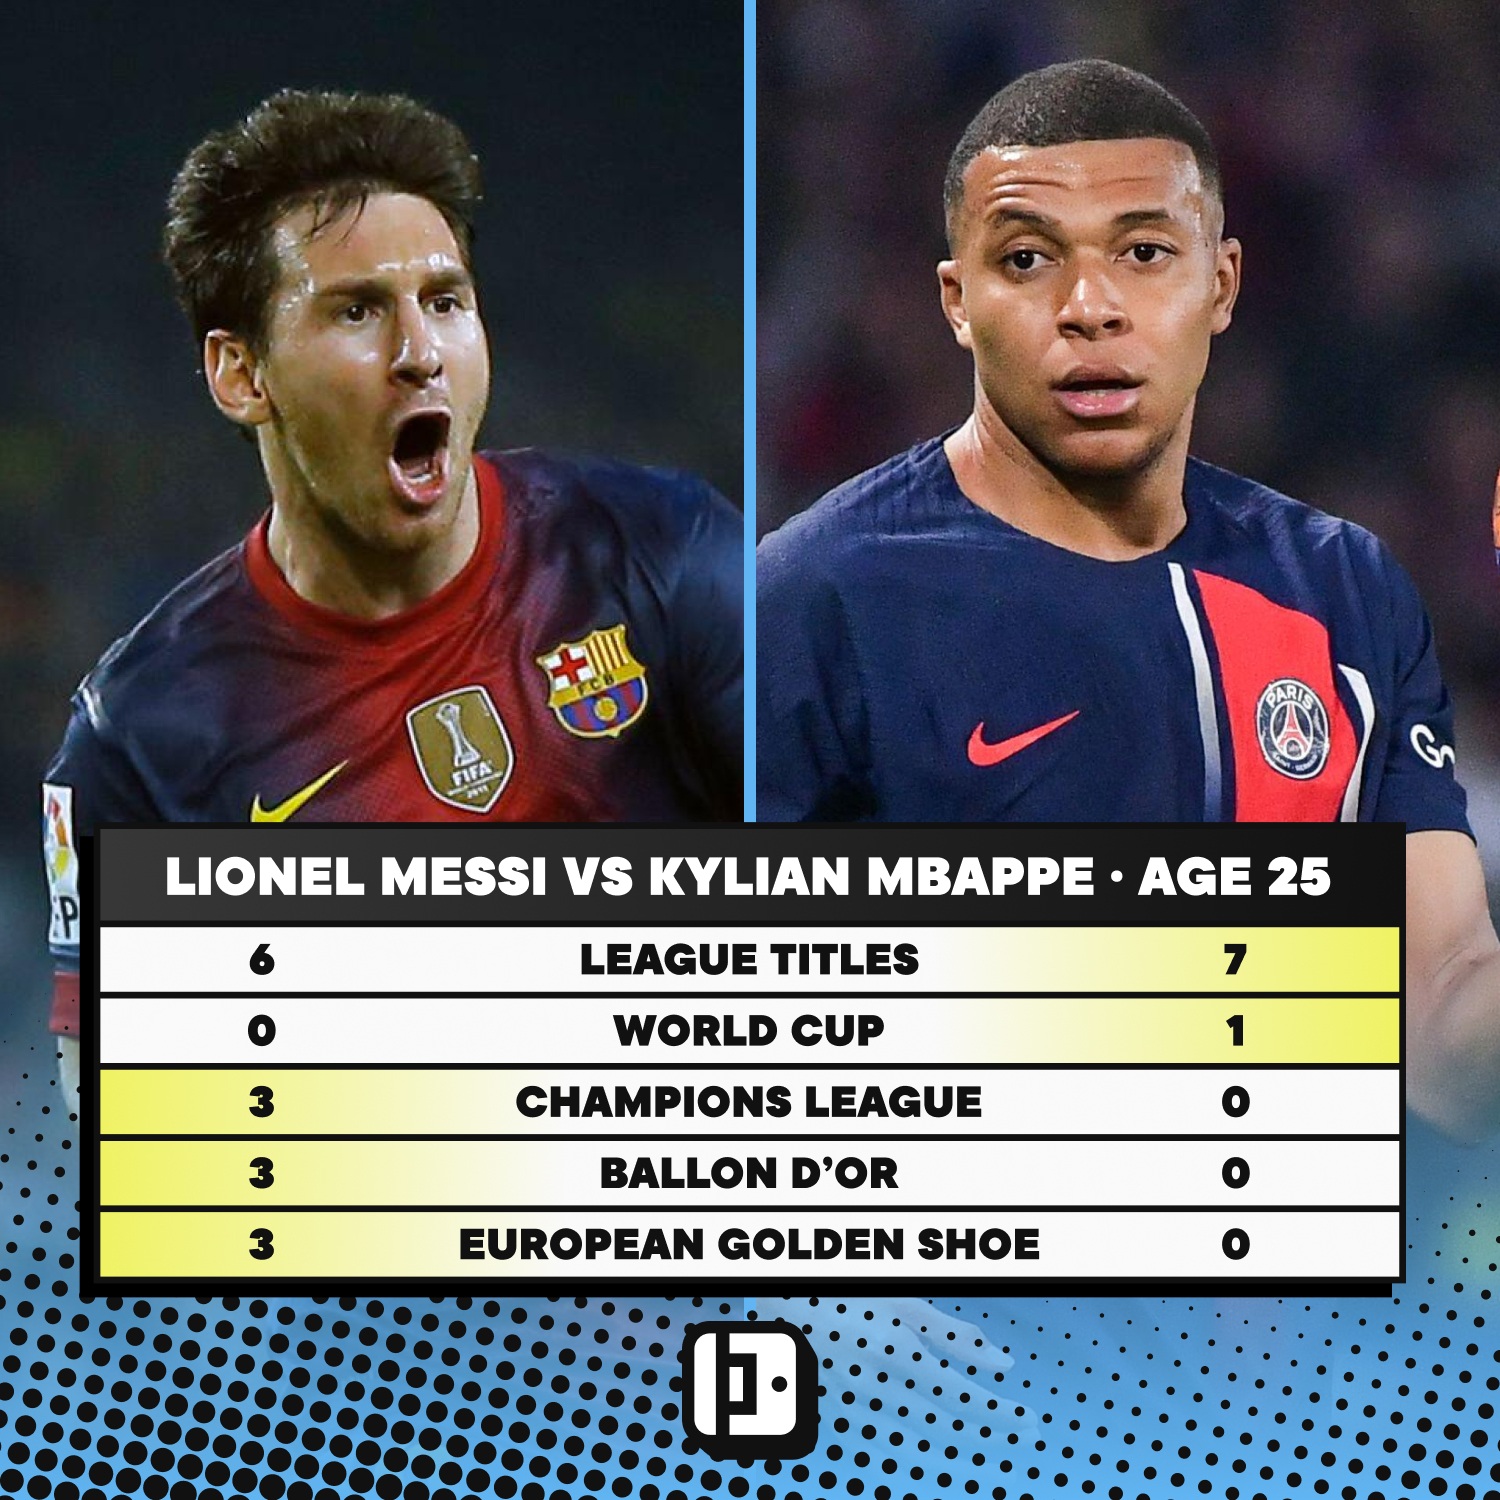 comparing kylian mbappe’s trophy haul to lionel messi’s at the same age